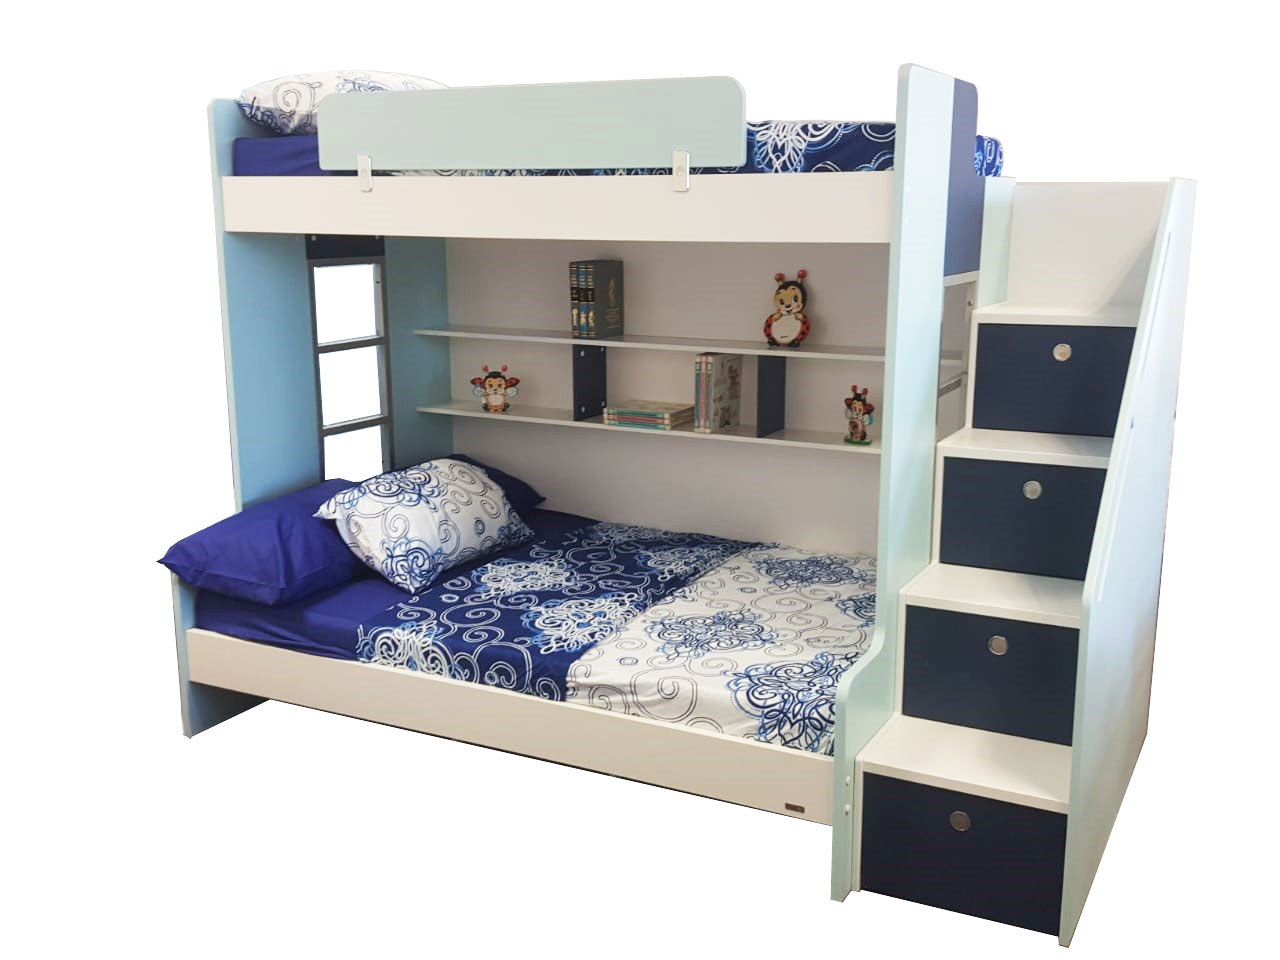 Combo Bunk Bed Custom Beds, Bunk Bed Accessories For Kids